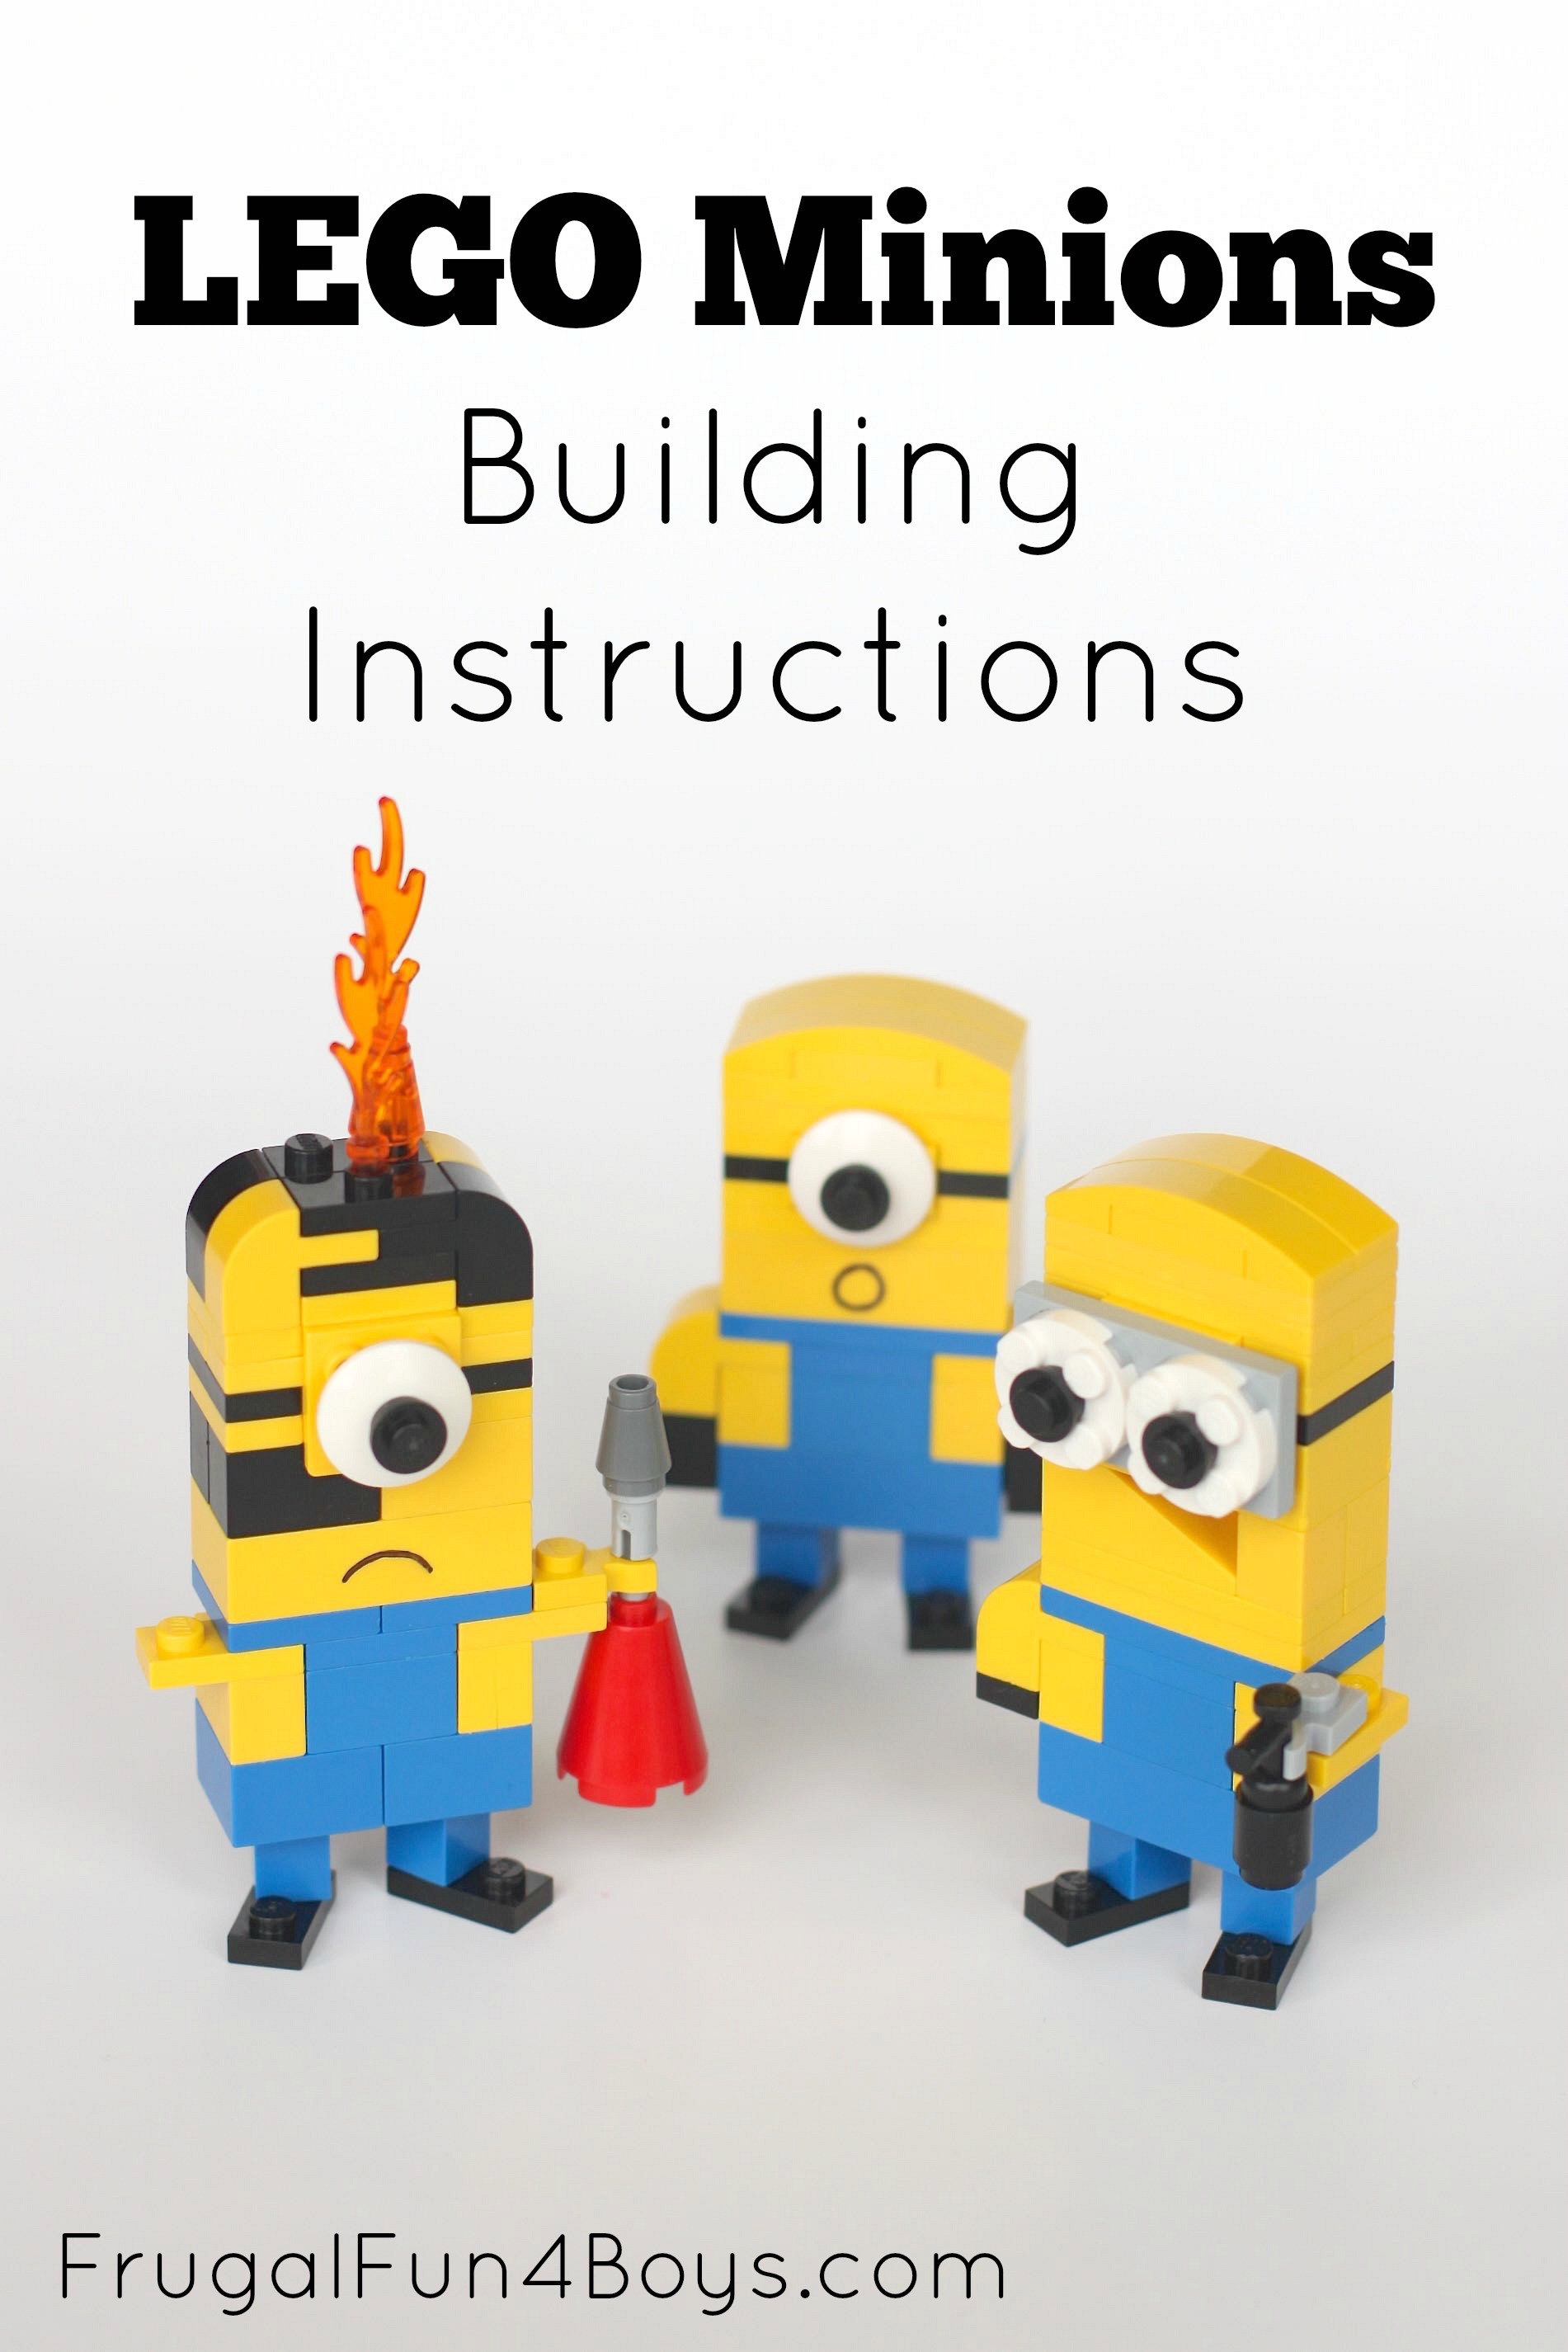 Lego Minions - Building Instructions